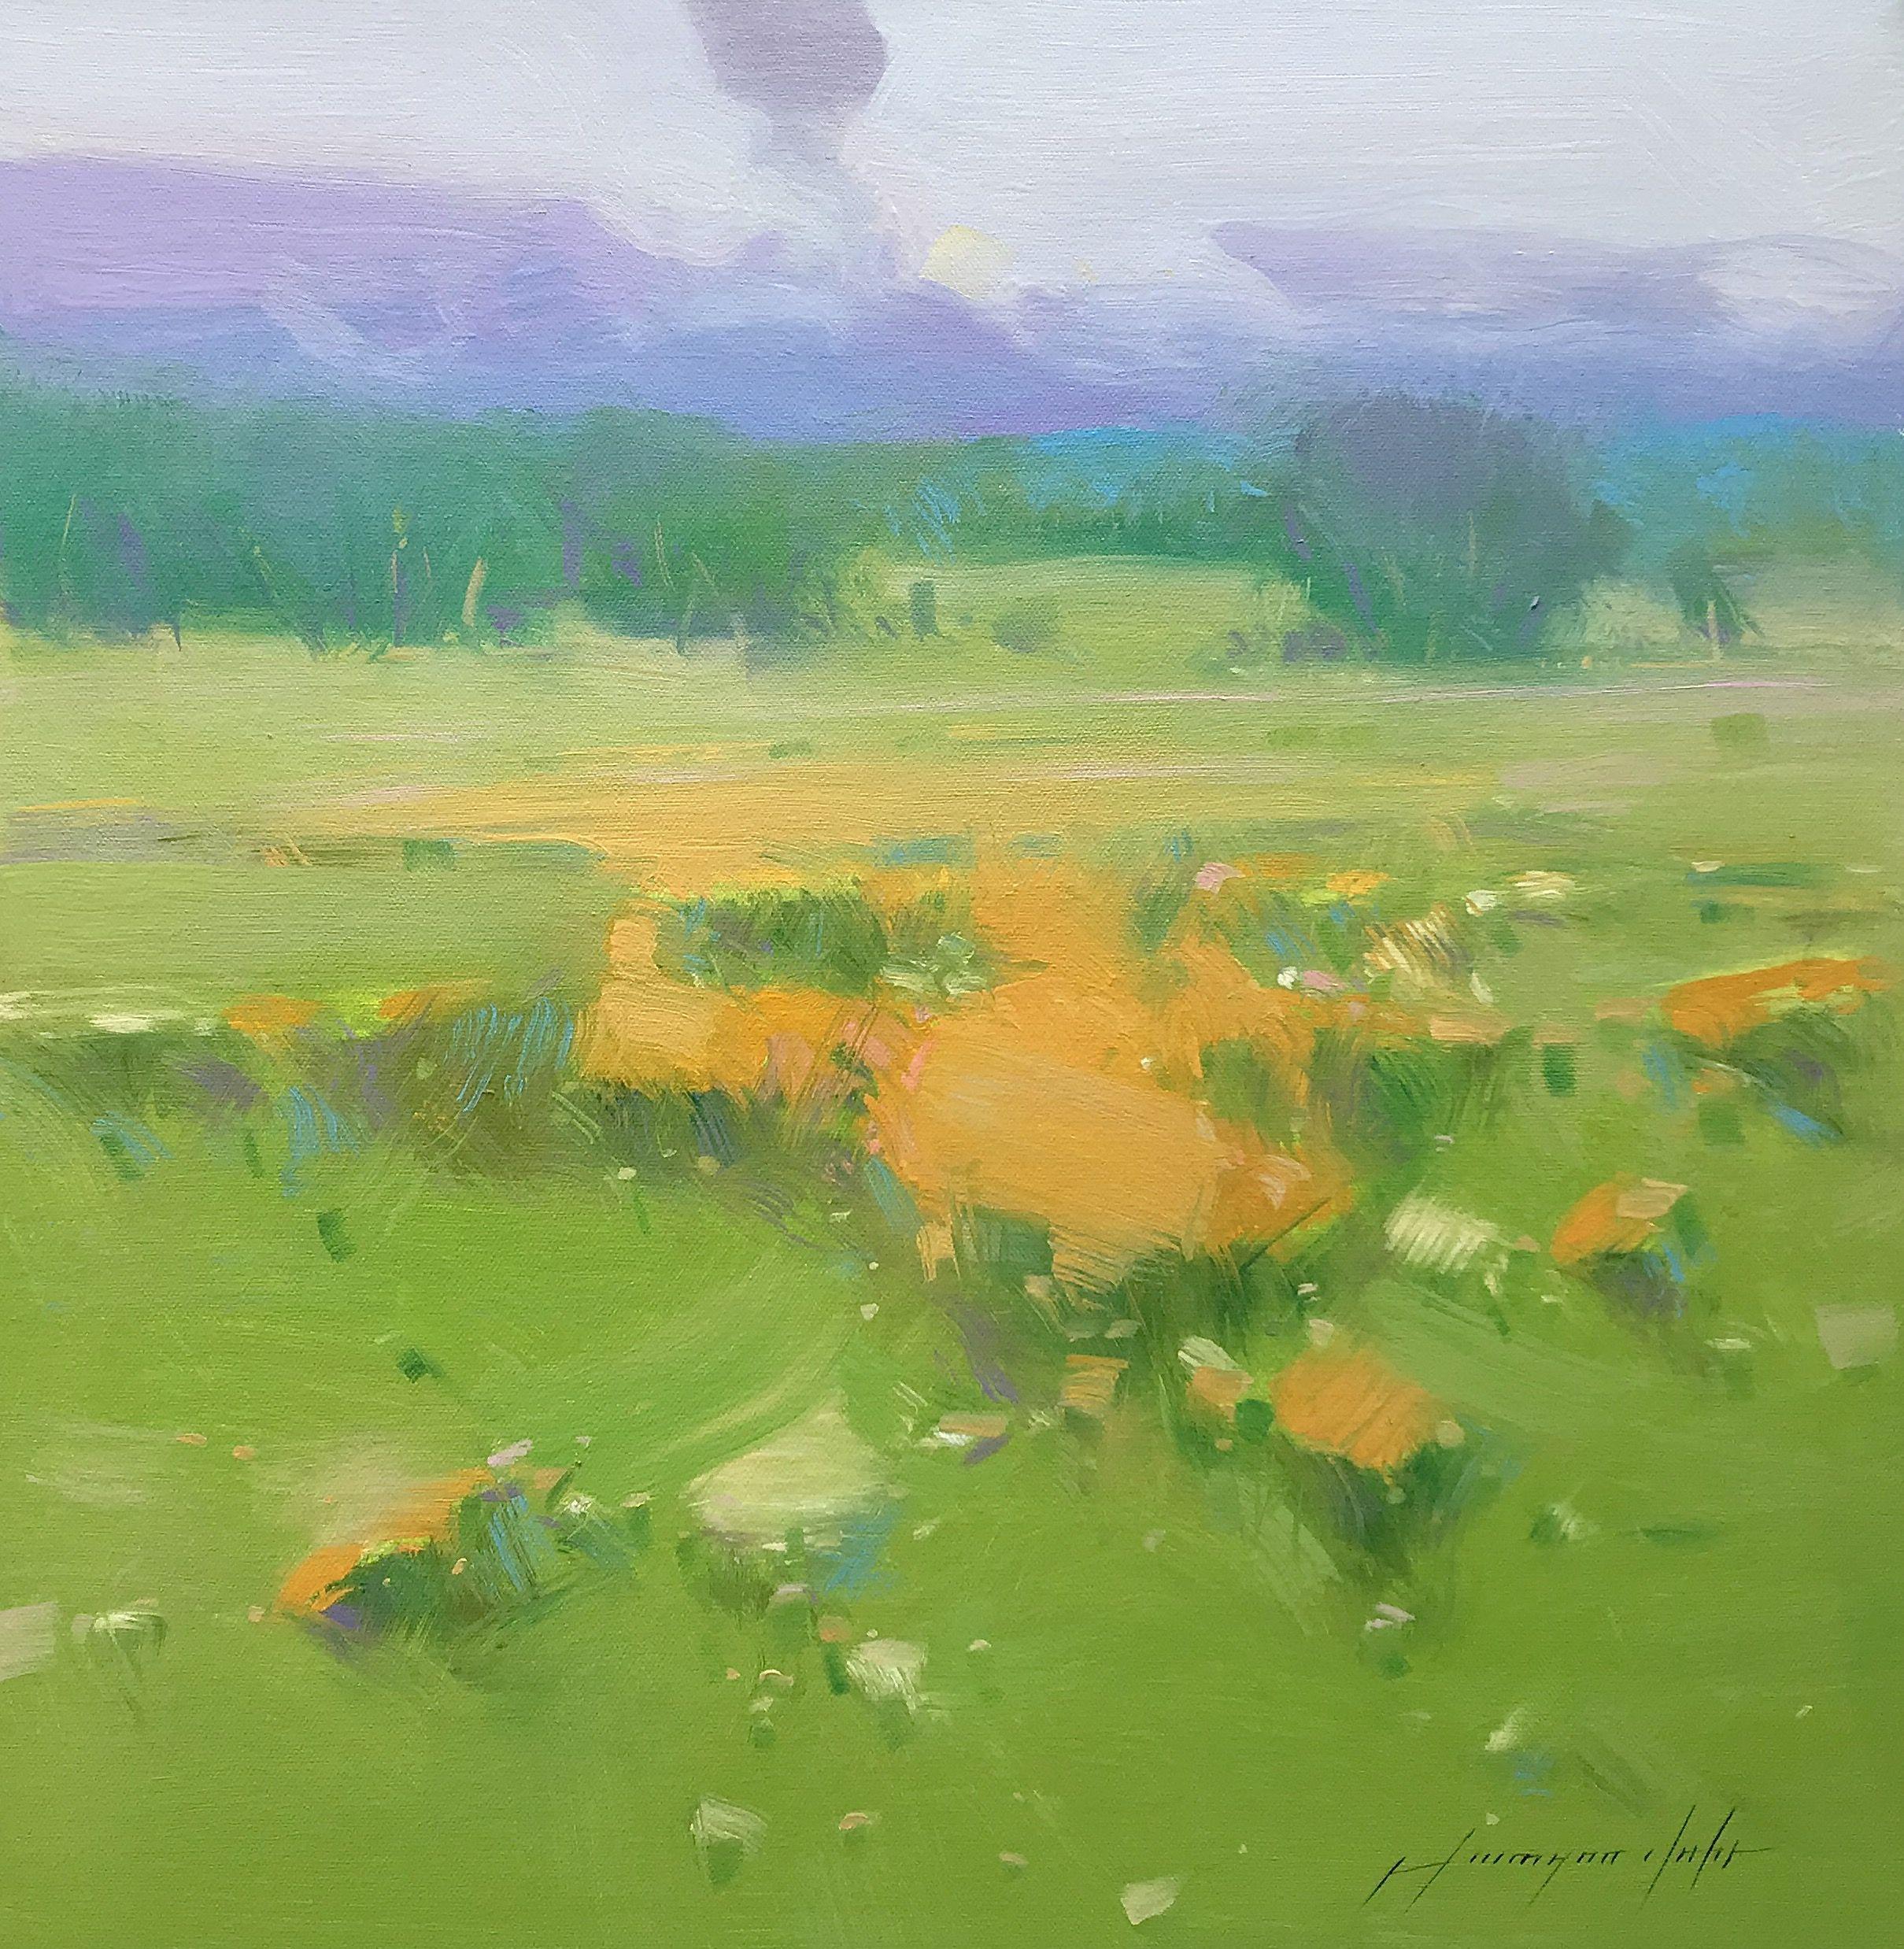 Artist: Vahe Yeremyan  Work: Original Oil Painting, Handmade Artwork, One of a Kind  Medium: Oil on Canvas  Year: 2020  Style: Impressionism,  Subject: Summer Field,  Size: 18.5" x 18" x 0.8'' inch, 47x46x2 cm,  Unframed, Stretched on Wooden Bar,